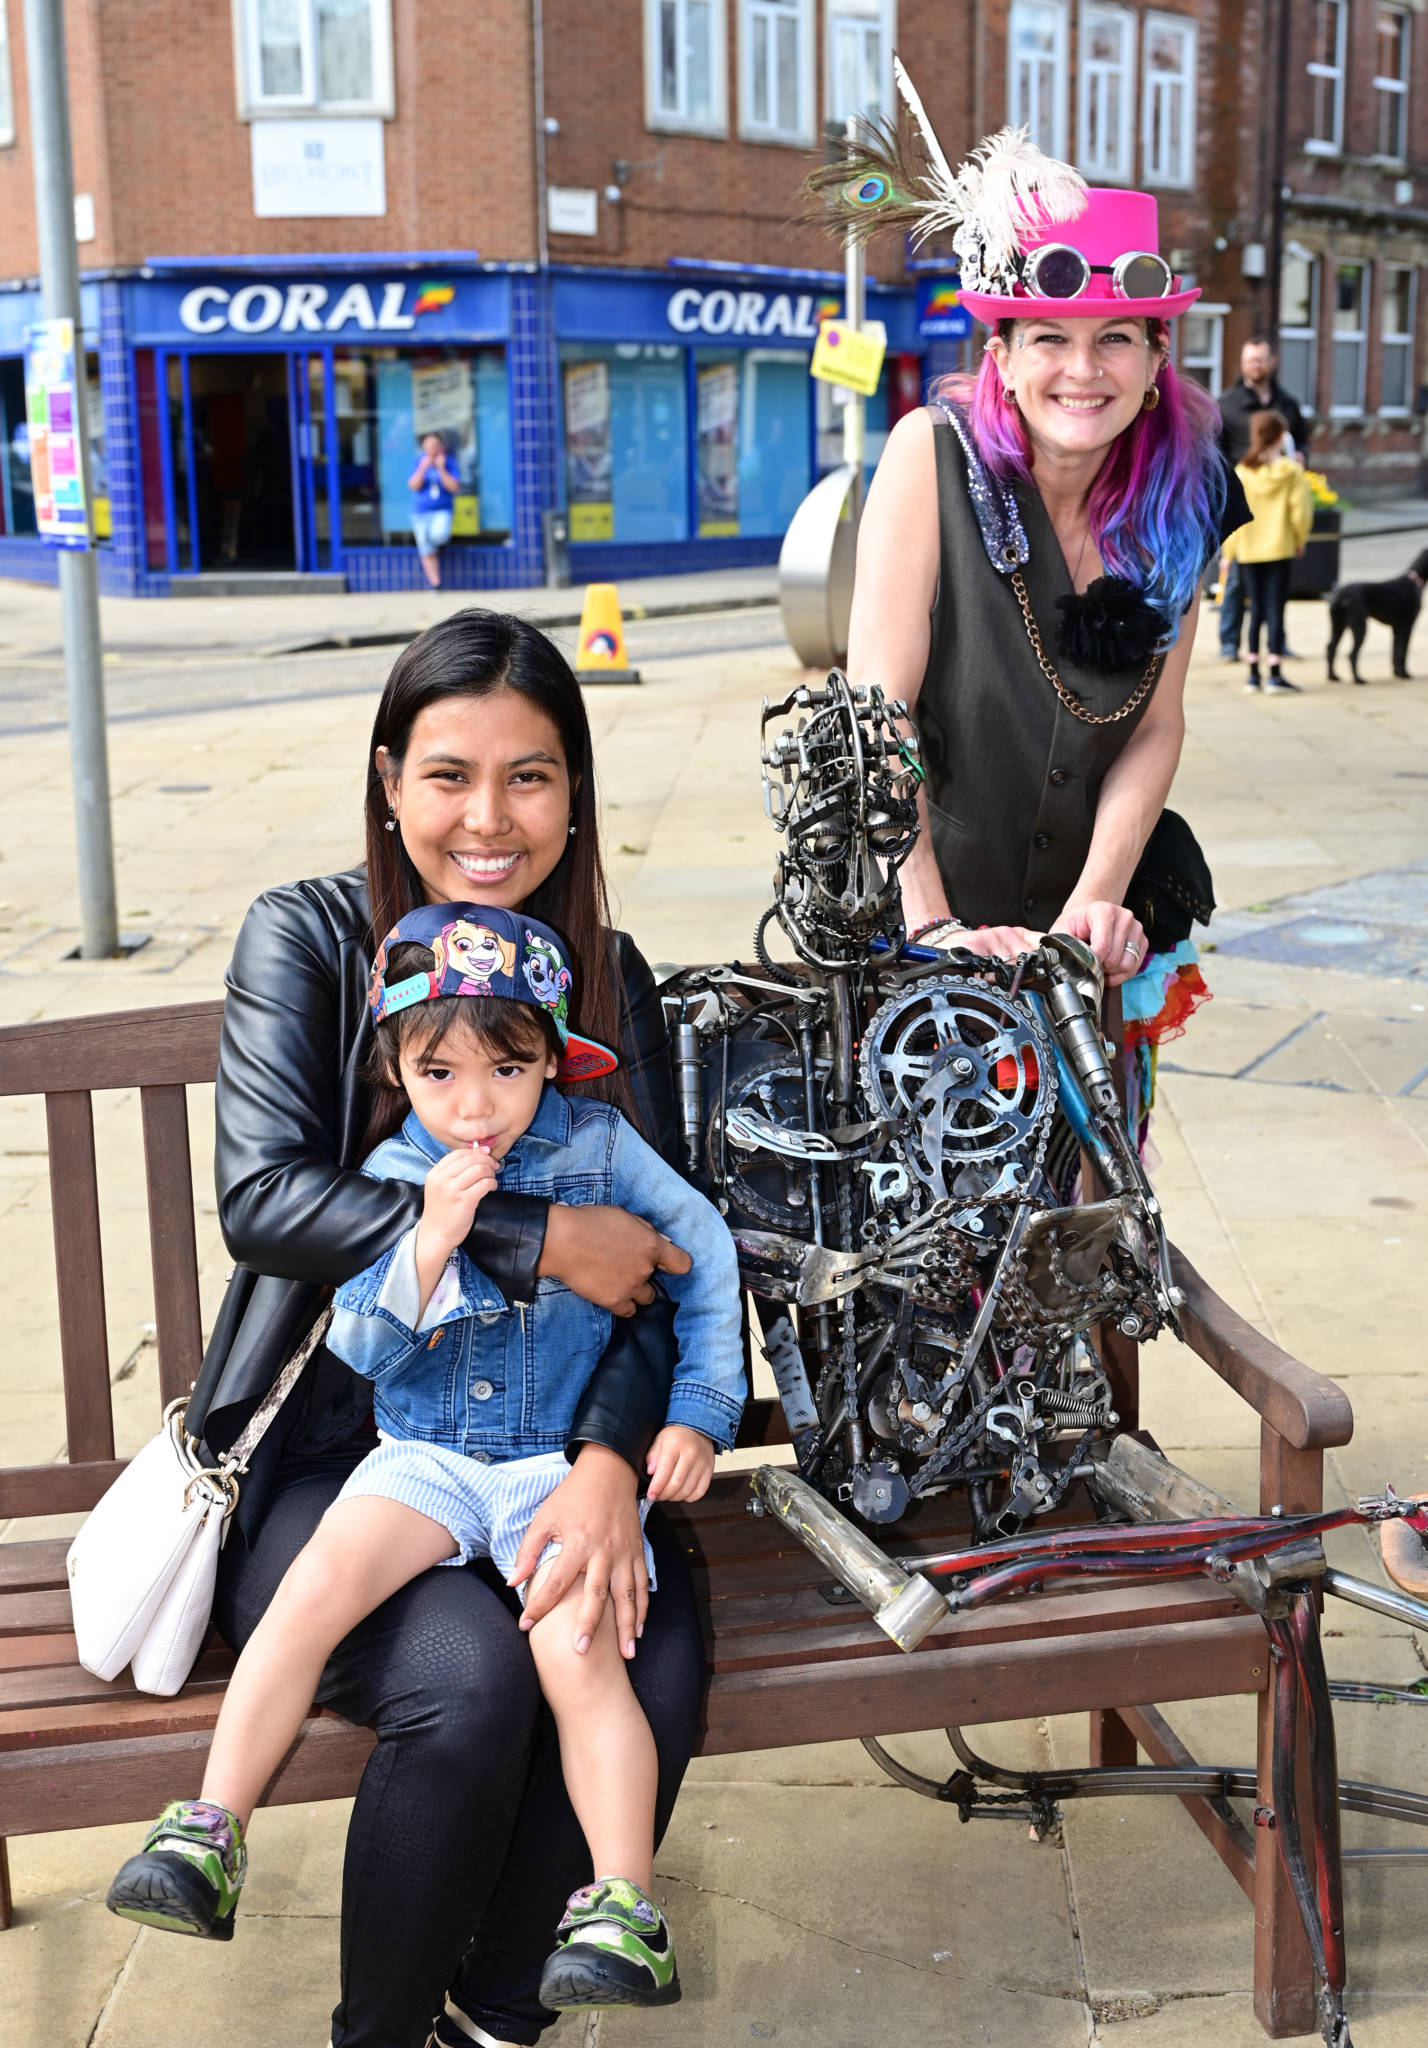 Metal 'Automata' with festival-goer